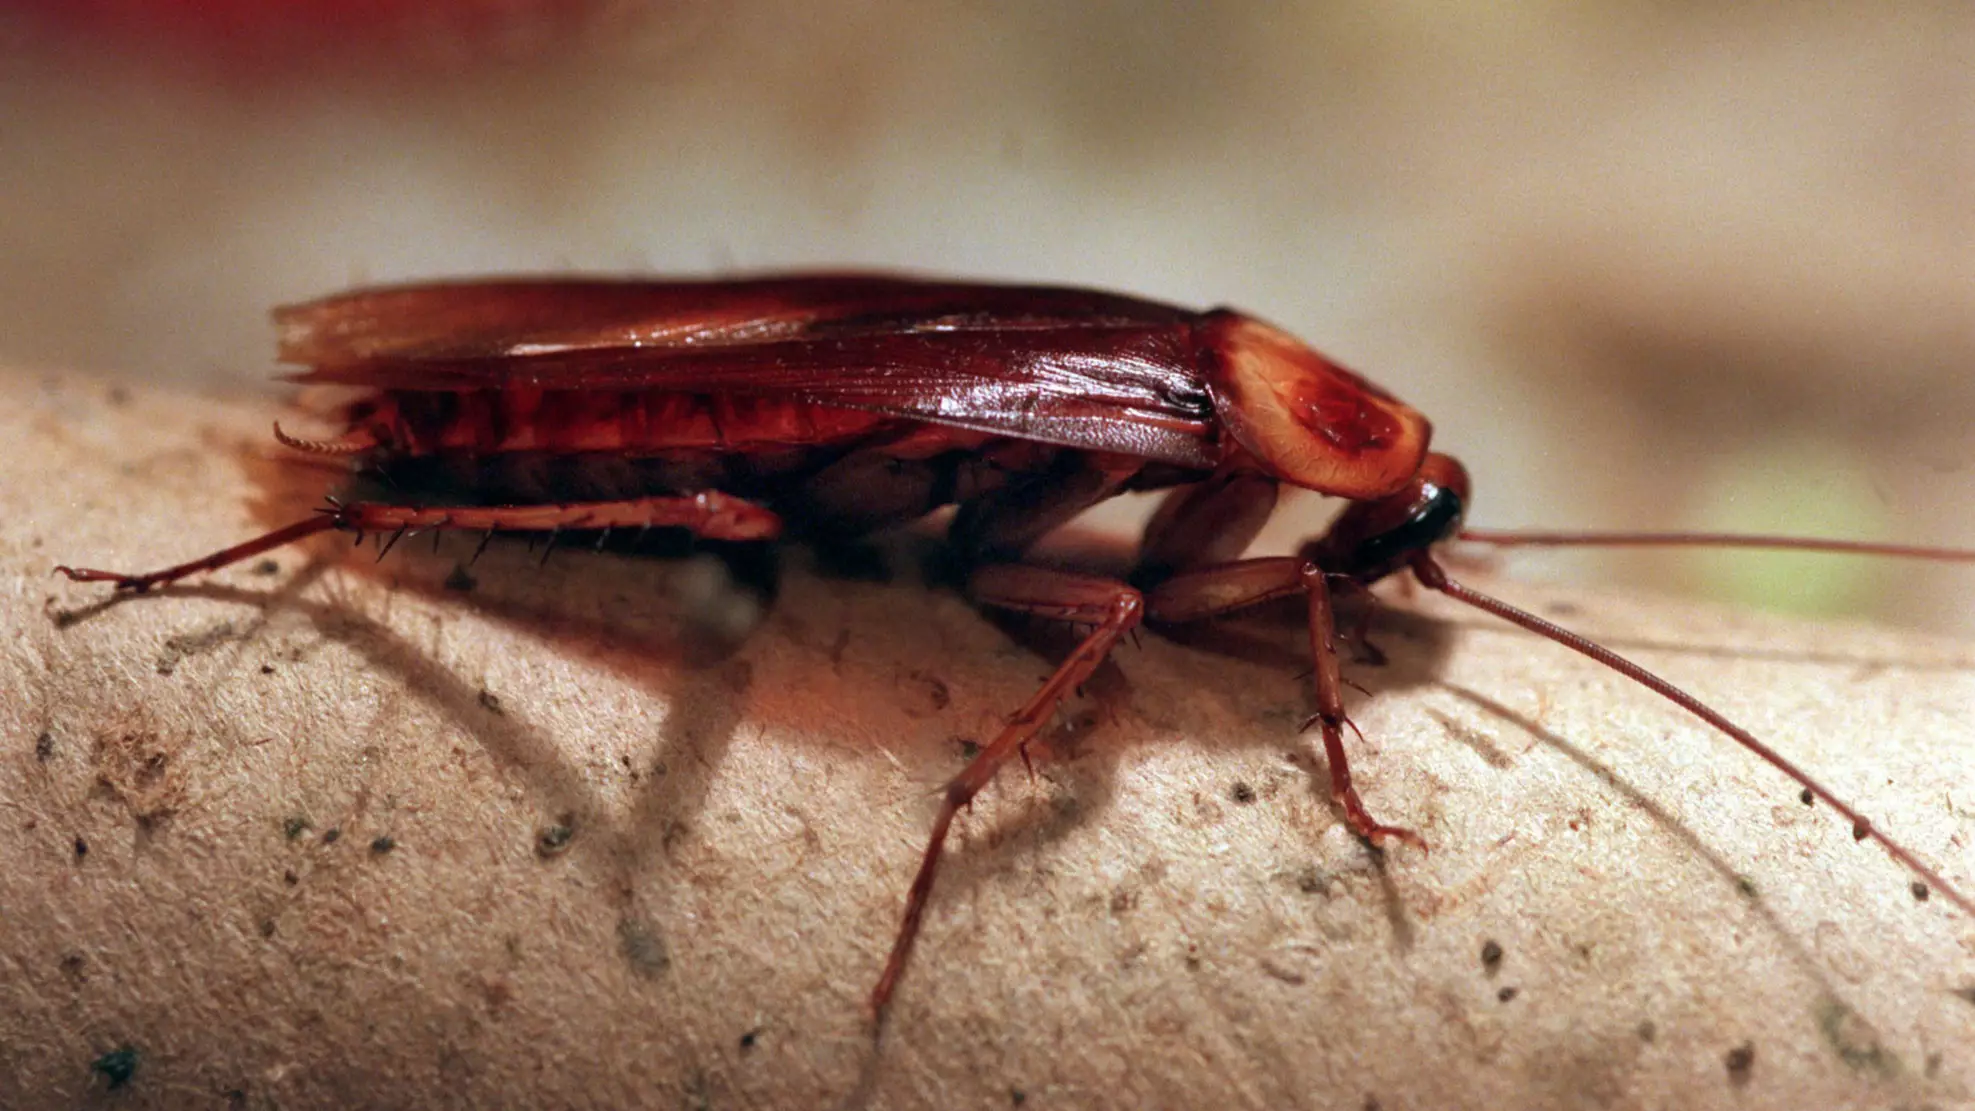 Cockroaches Have Become Even Harder To Kill, Study Finds